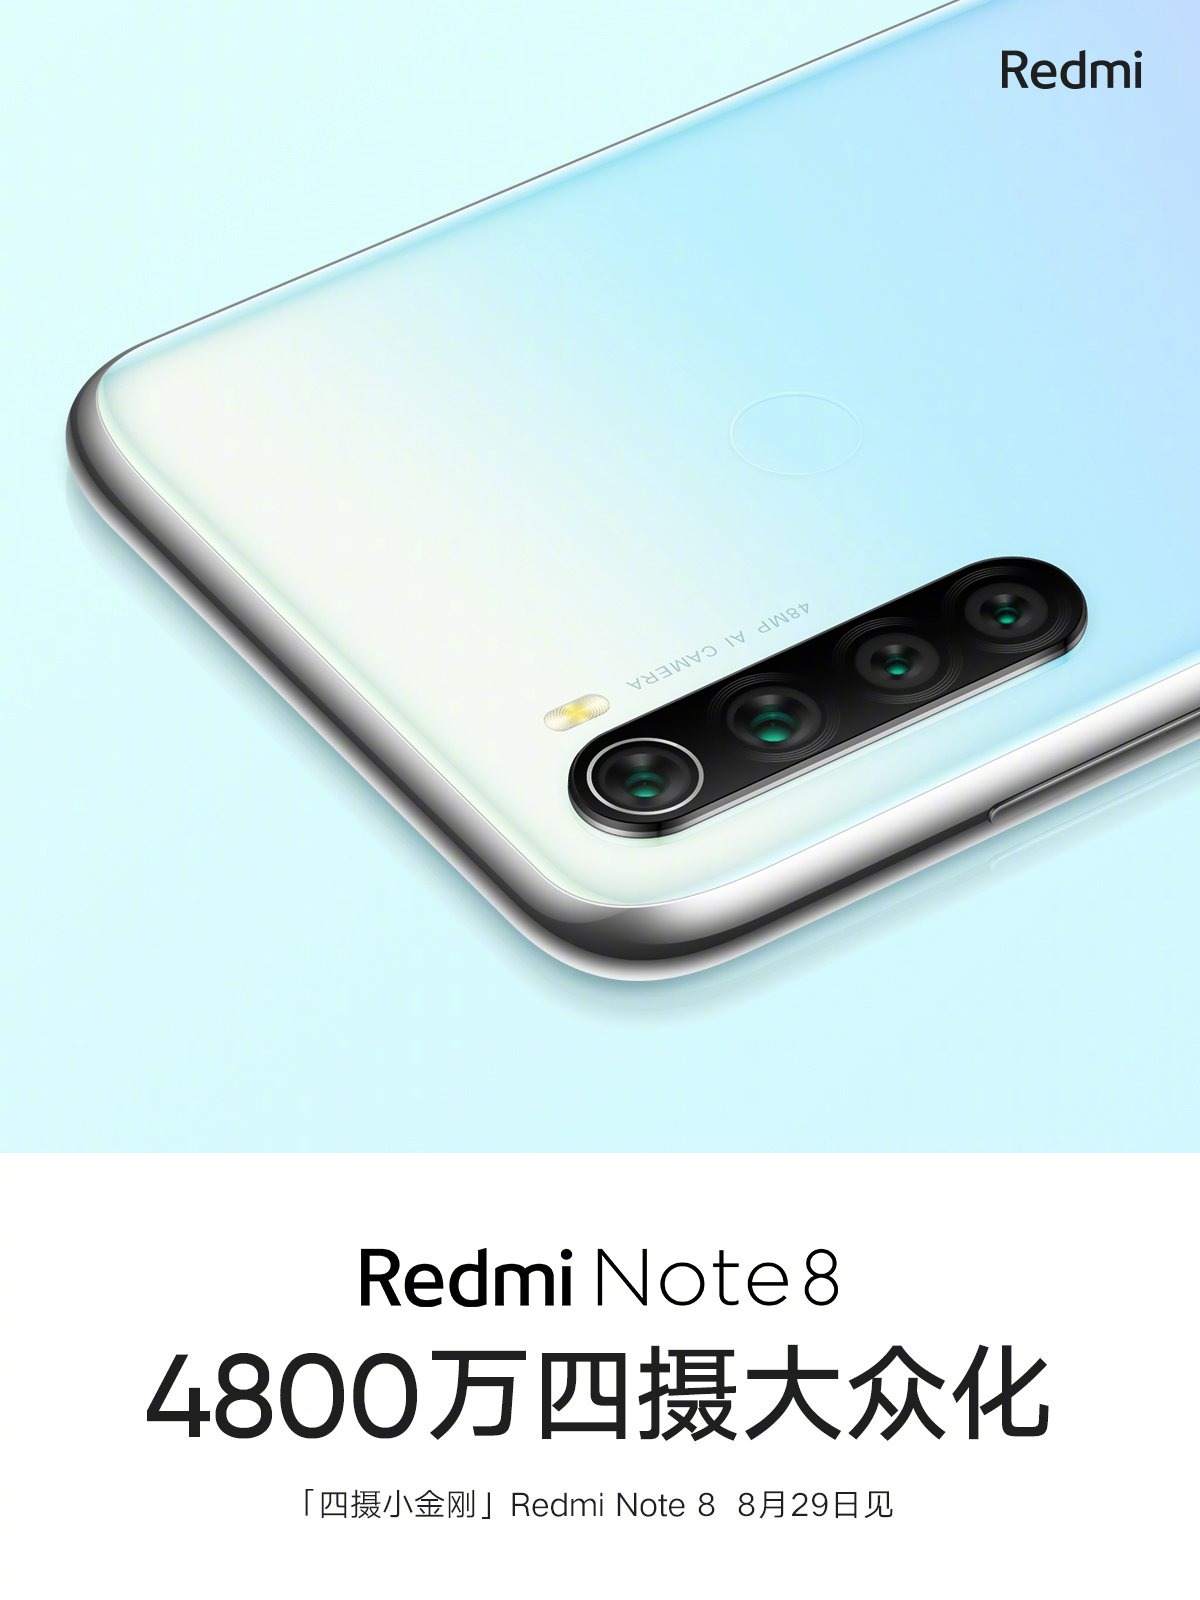 redmi-note-8-rear-official